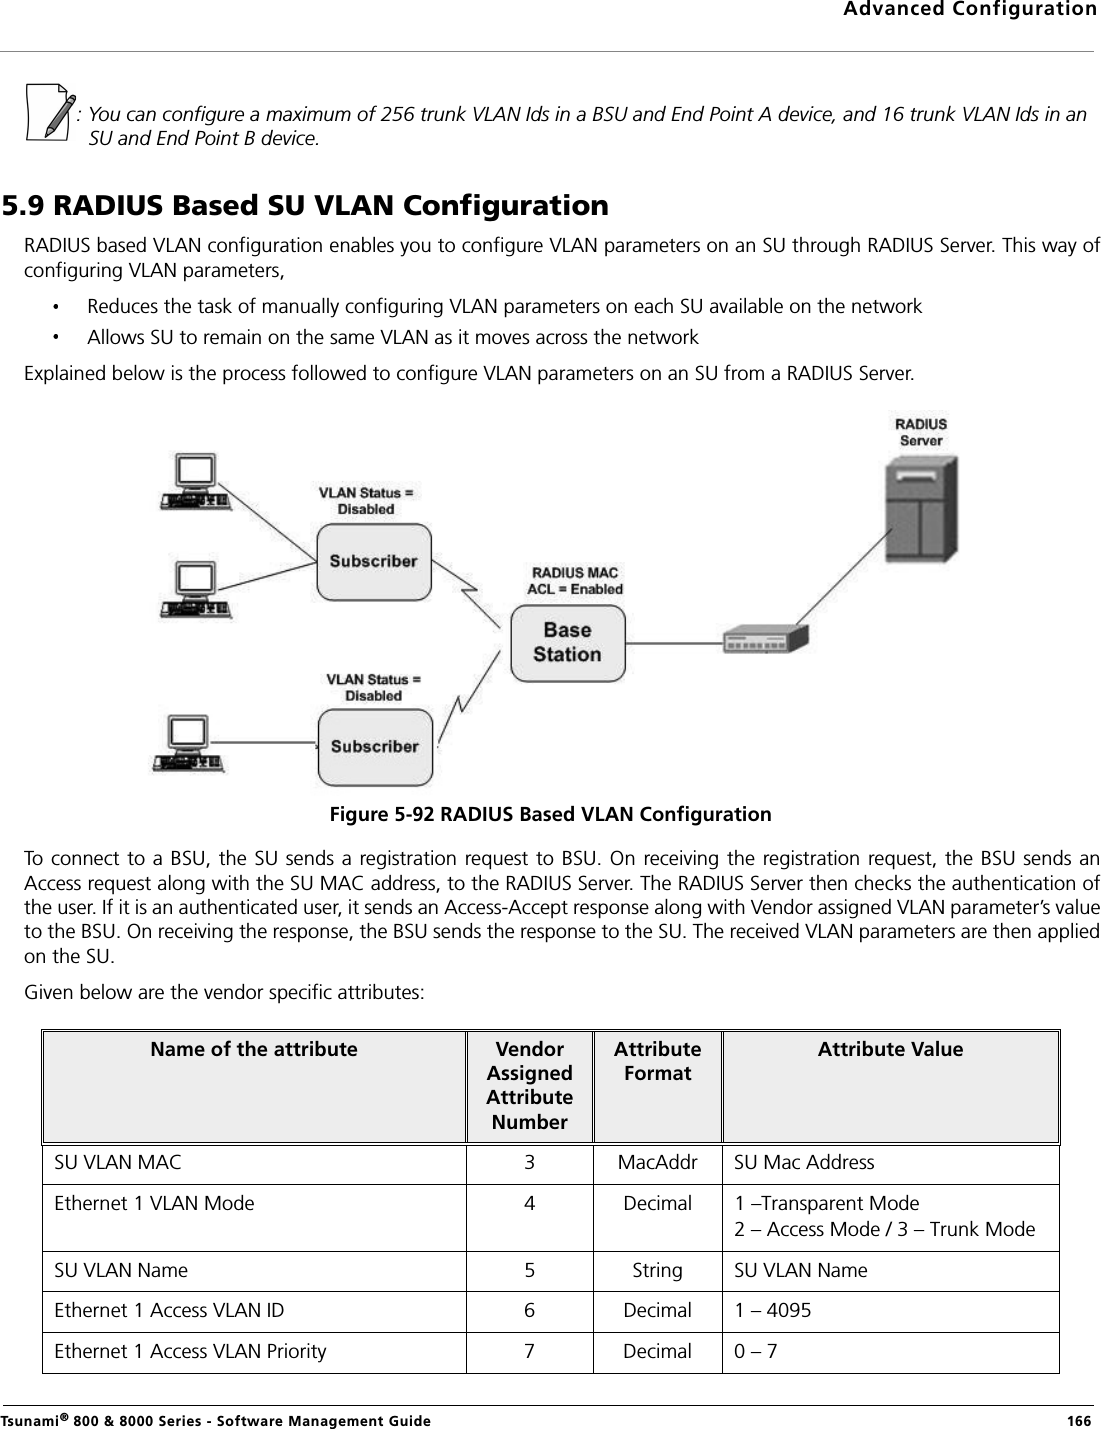 Advanced ConfigurationTsunami® 800 &amp; 8000 Series - Software Management Guide  166: You can configure a maximum of 256 trunk VLAN Ids in a BSU and End Point A device, and 16 trunk VLAN Ids in an SU and End Point B device.5.9 RADIUS Based SU VLAN ConfigurationRADIUS based VLAN configuration enables you to configure VLAN parameters on an SU through RADIUS Server. This way ofconfiguring VLAN parameters, Reduces the task of manually configuring VLAN parameters on each SU available on the networkAllows SU to remain on the same VLAN as it moves across the networkExplained below is the process followed to configure VLAN parameters on an SU from a RADIUS Server.Figure 5-92 RADIUS Based VLAN ConfigurationTo  connect to a BSU, the SU sends a registration request to BSU. On  receiving the registration  request, the BSU sends anAccess request along with the SU MAC address, to the RADIUS Server. The RADIUS Server then checks the authentication ofthe user. If it is an authenticated user, it sends an Access-Accept response along with Vendor assigned VLAN parameter’s valueto the BSU. On receiving the response, the BSU sends the response to the SU. The received VLAN parameters are then appliedon the SU.Given below are the vendor specific attributes: Name of the attribute Vendor Assigned Attribute Number Attribute Format Attribute Value SU VLAN MAC 3 MacAddr  SU Mac Address Ethernet 1 VLAN Mode 4 Decimal  1 –Transparent Mode2 – Access Mode / 3 – Trunk ModeSU VLAN Name 5 String  SU VLAN Name Ethernet 1 Access VLAN ID 6 Decimal  1 – 4095 Ethernet 1 Access VLAN Priority  7 Decimal  0 – 7 